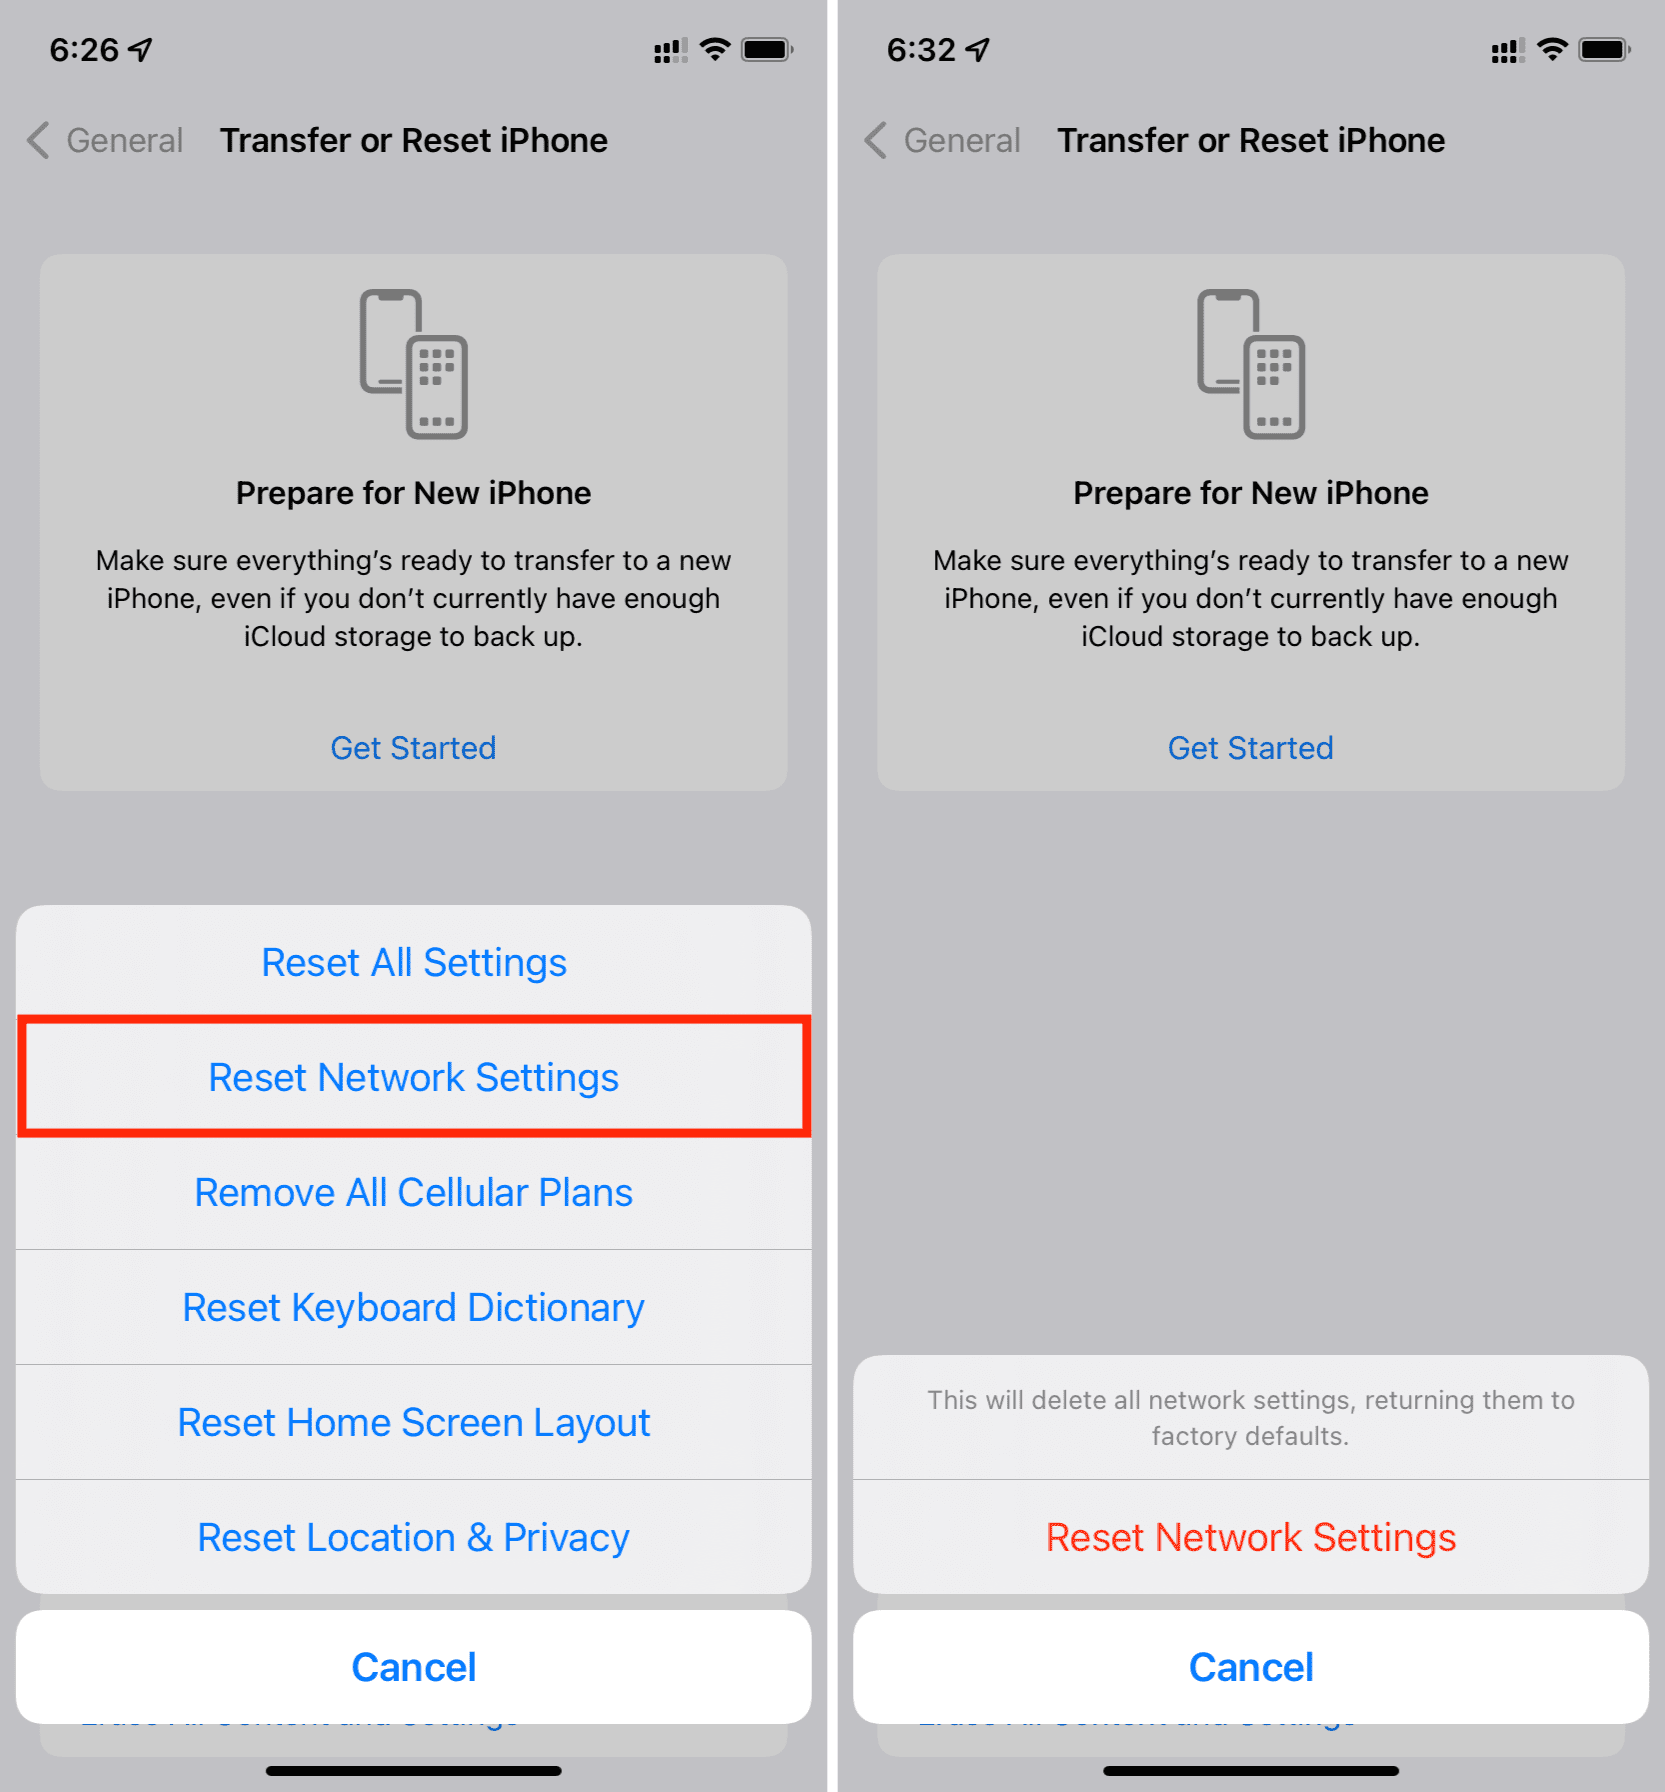 Open the "Settings" app on your iPhone.
Select "General" and then "Reset".